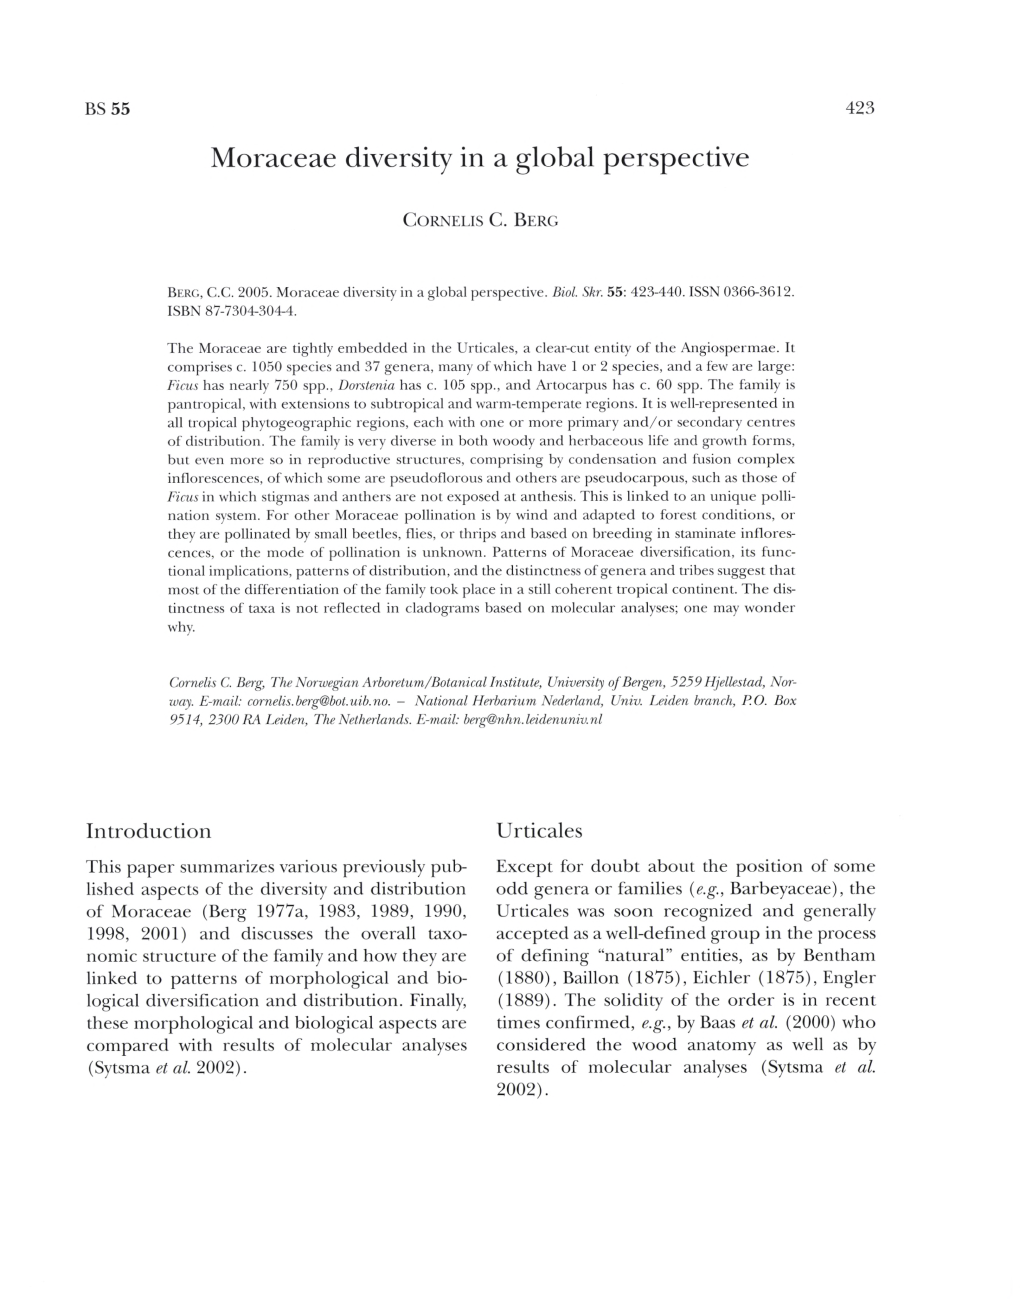 Moraceae Diversity in a Global Perspective